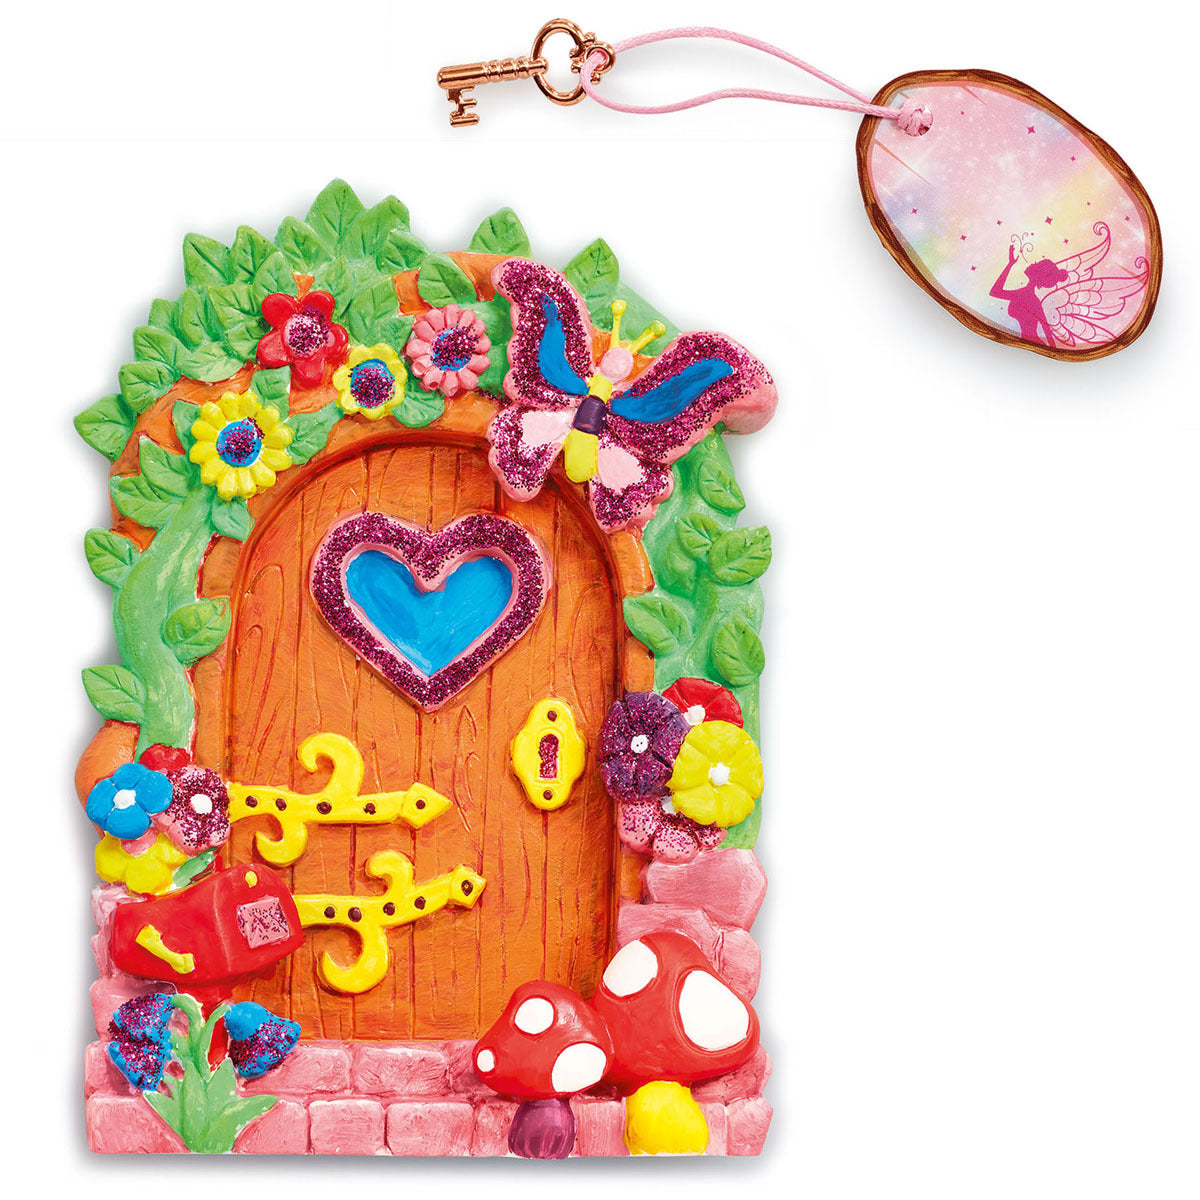 Out to Impress Paint Your Own Fairy Door Craft Set